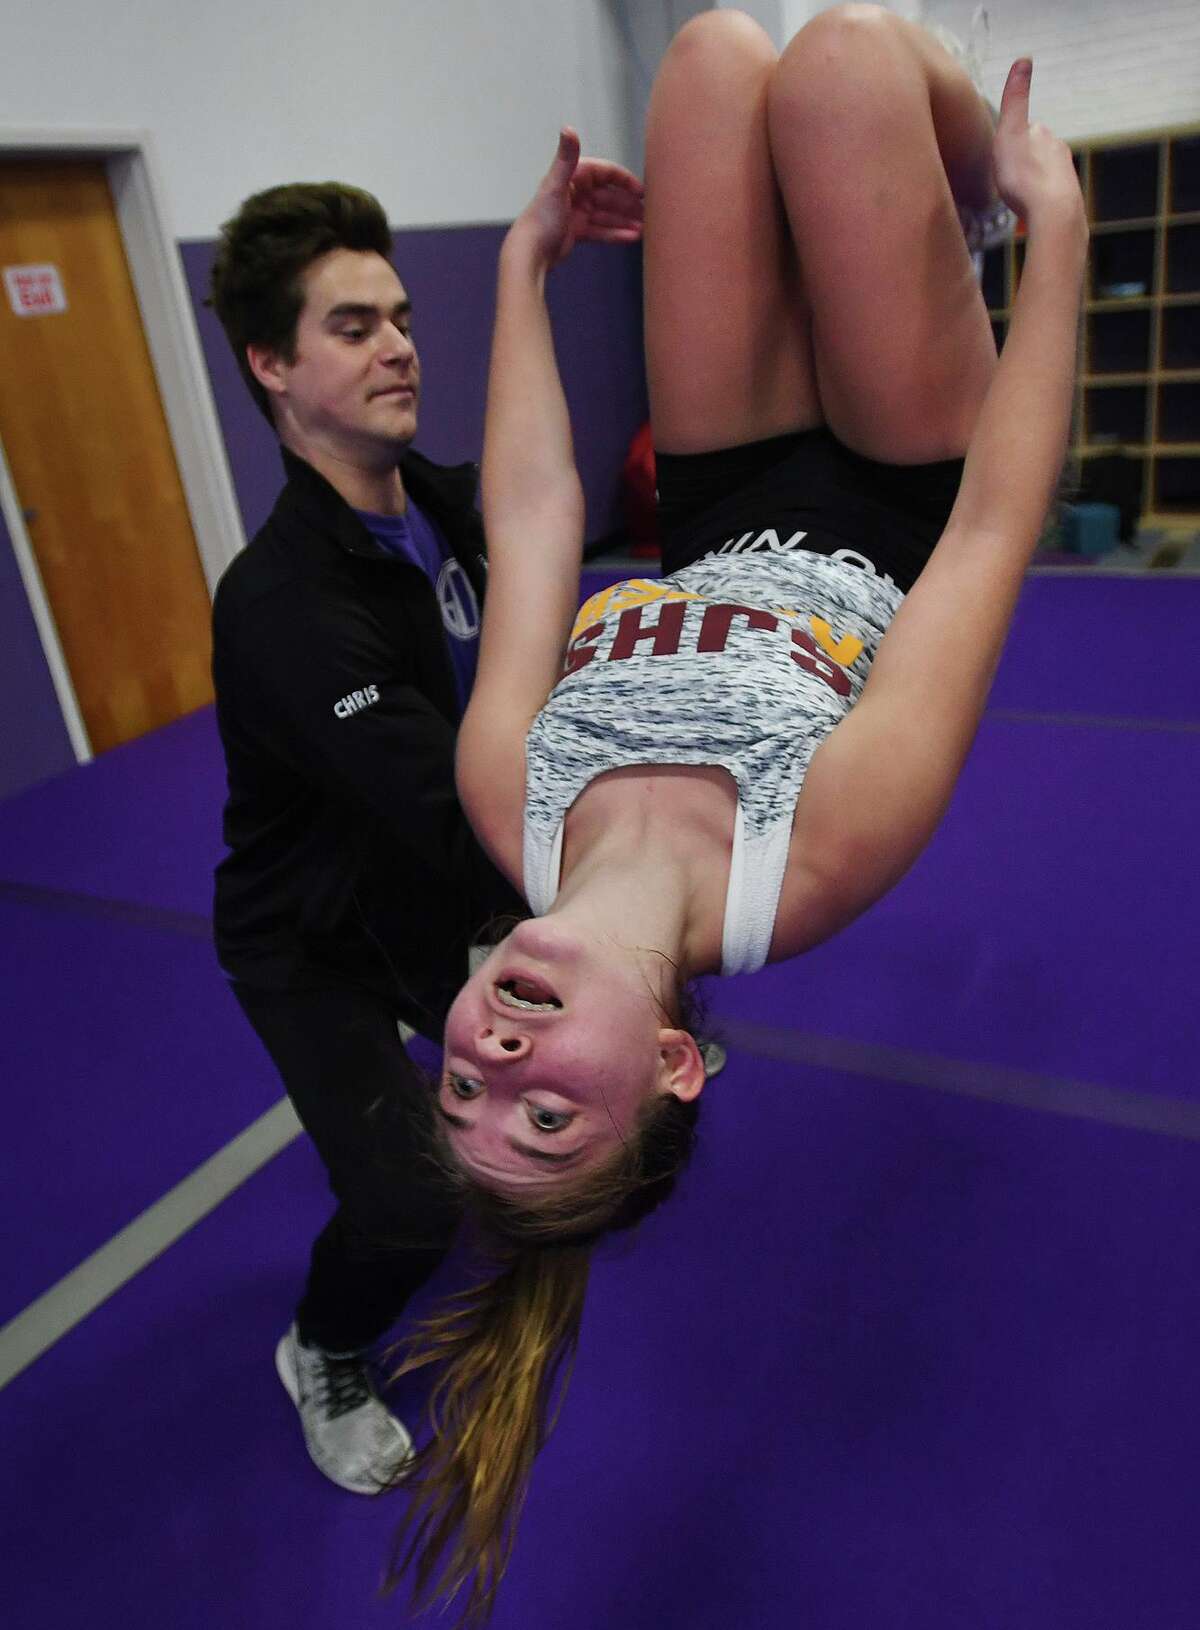 Hope Wenzel, 13, of Easton, practices back flips with the help of coach Chris Polley, of Norwalk, at the Gymnastics and Cheerleading Academy of CT in the SportsPlex complex at 85 Mill Plain Road in Fairfield, Conn. on Tuesday, September 17, 2019.